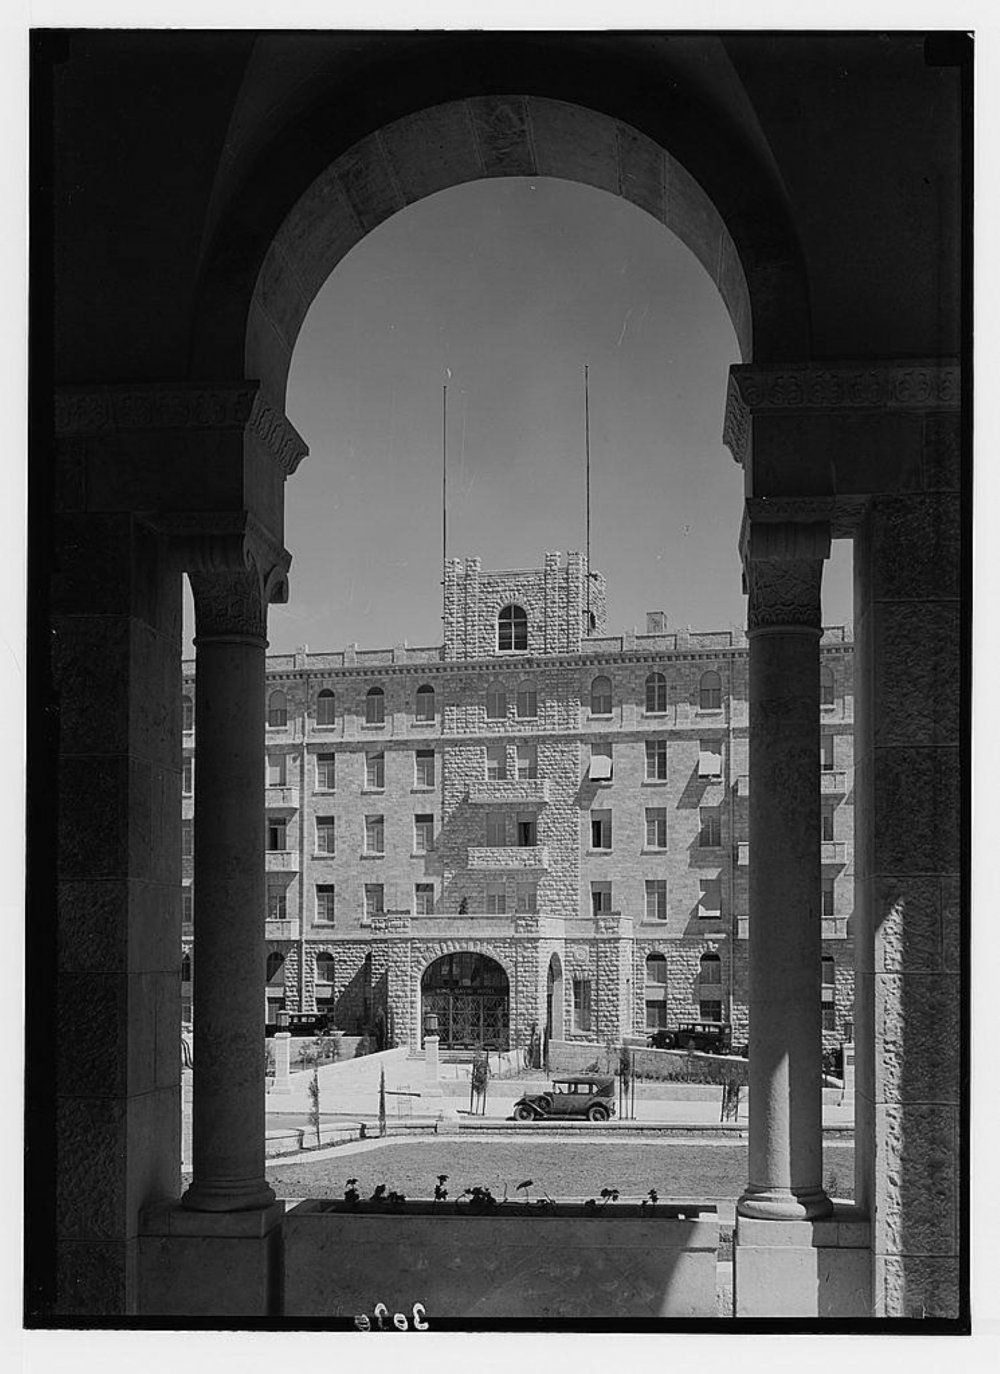 The view of the King David Hotel as seen if one stands in the arches of the YMCA, which is across the street from the hotel, ca. early 1930s